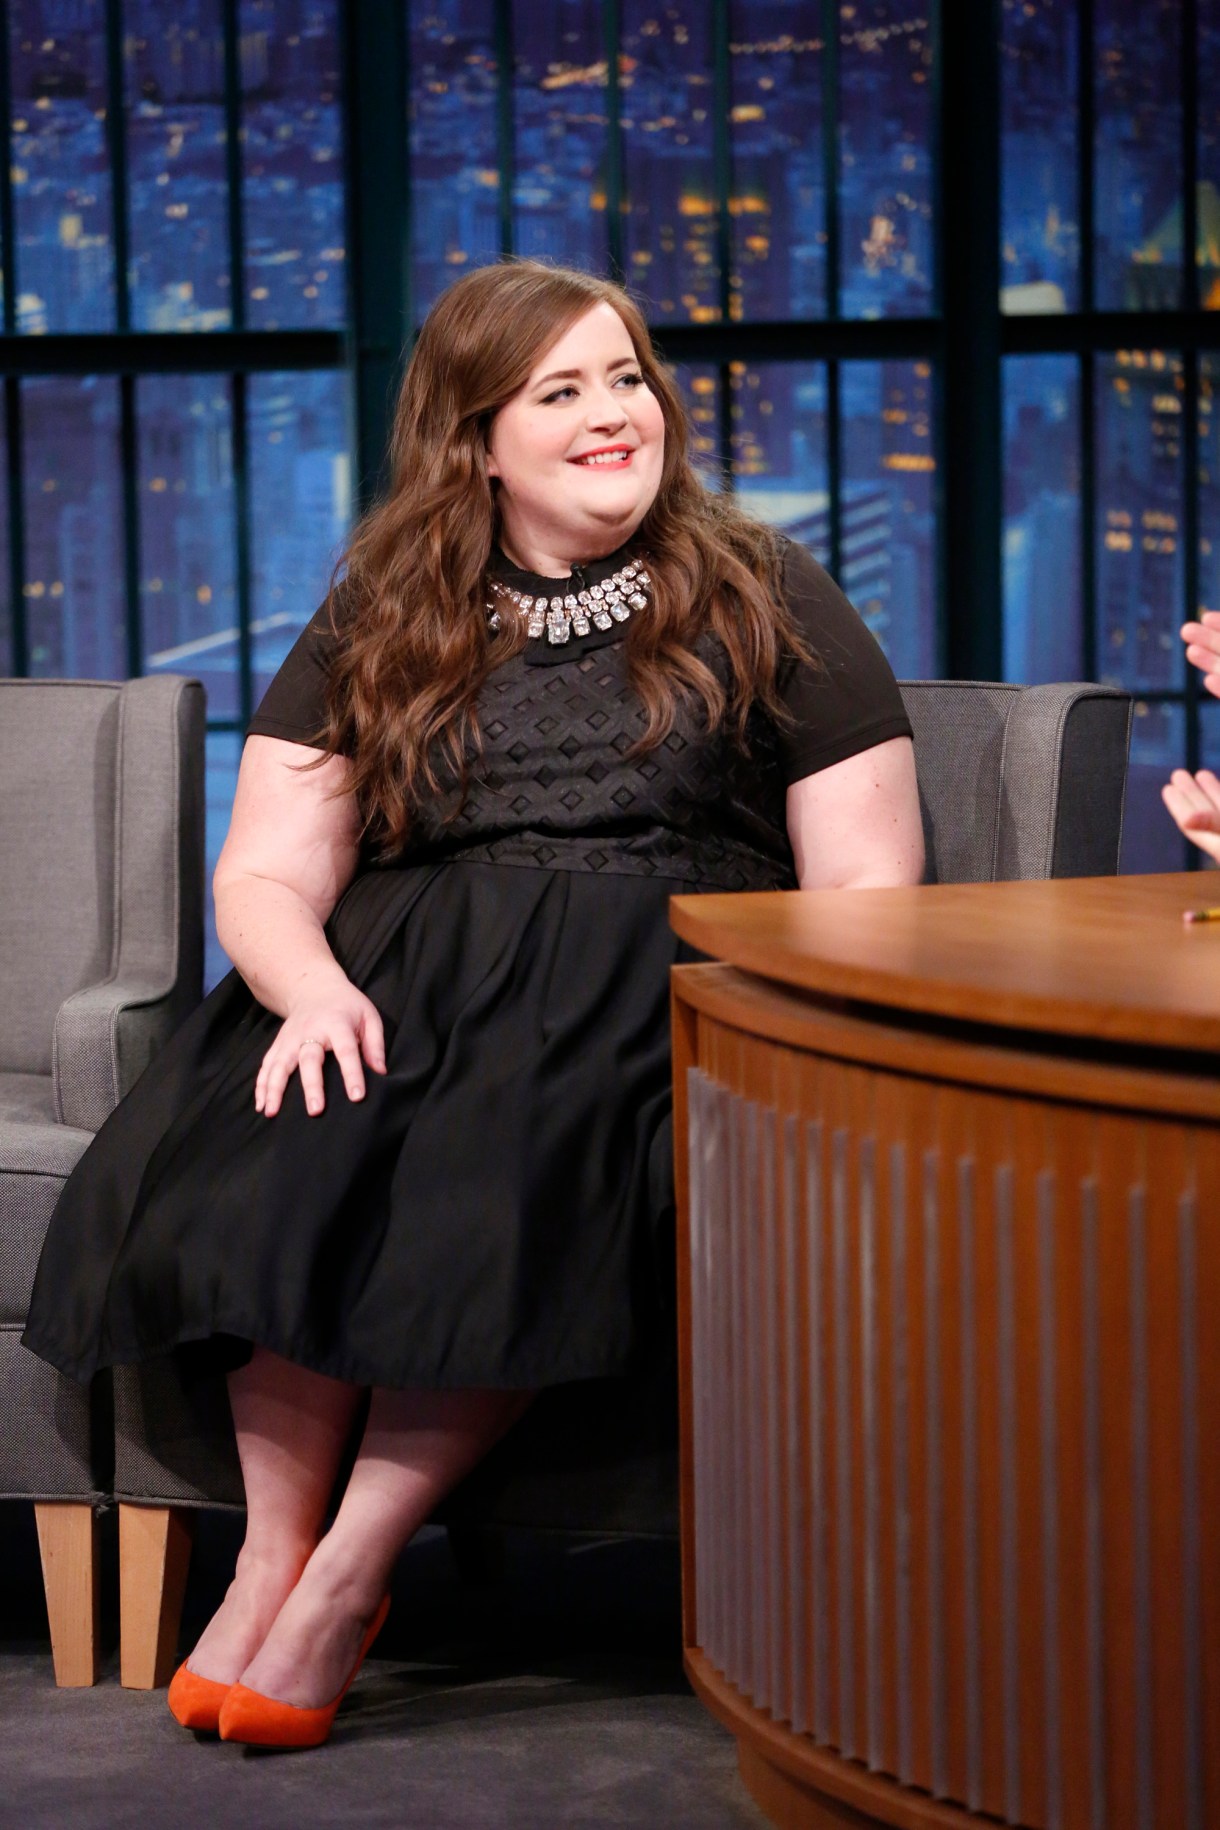 LATE NIGHT WITH SETH MEYERS -- Episode 324 -- Pictured: Comedian Aidy Bryant during an interview on February 9, 2016 --